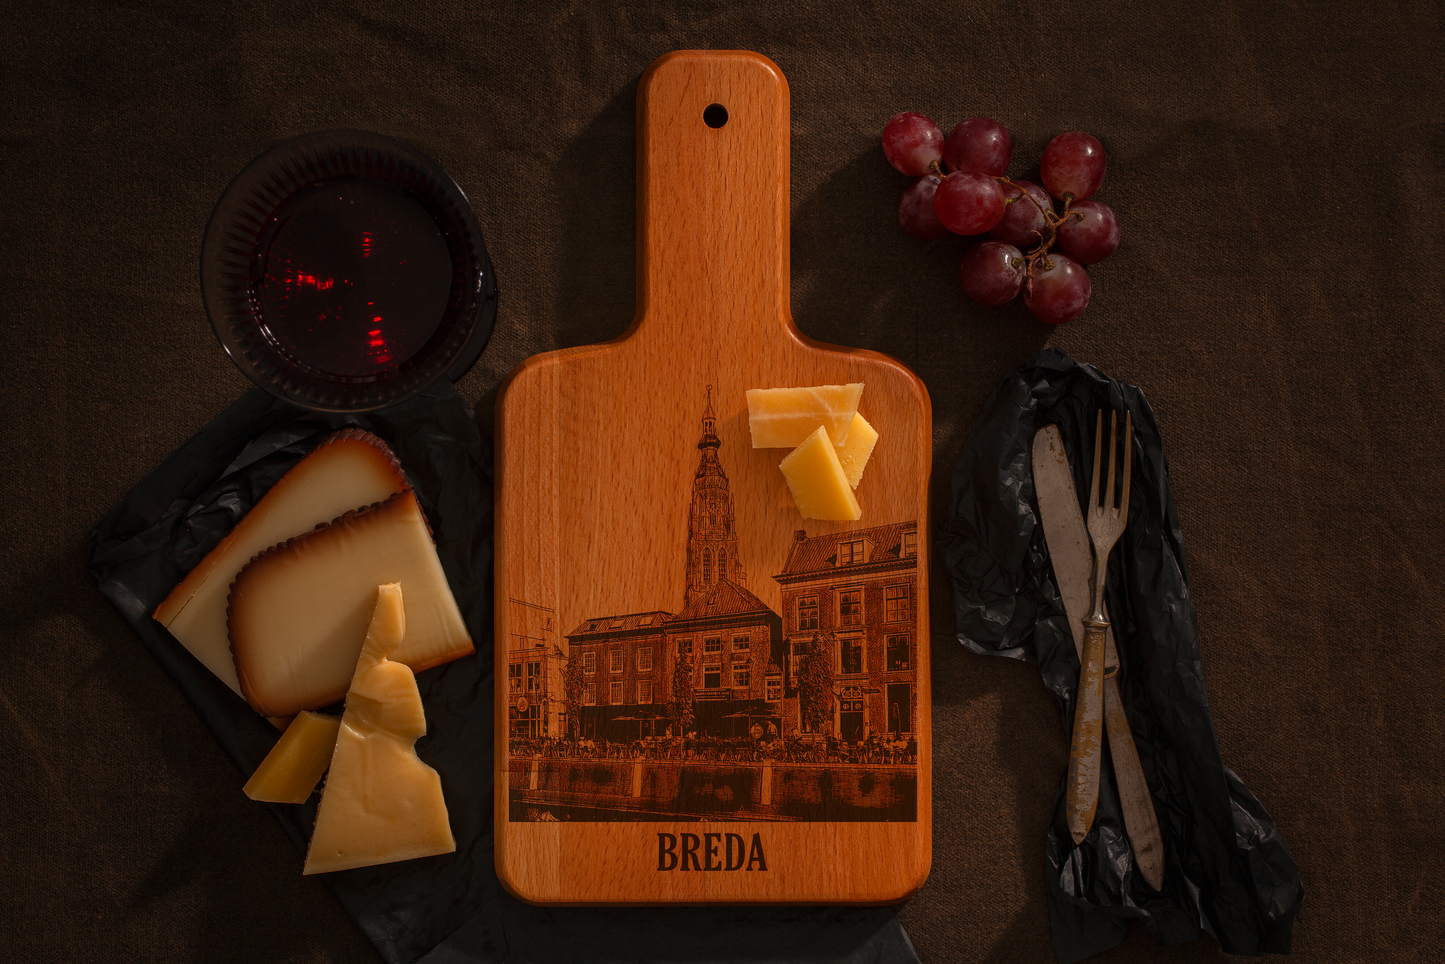 Breda, Grote Kerk, cheese board, with cheese